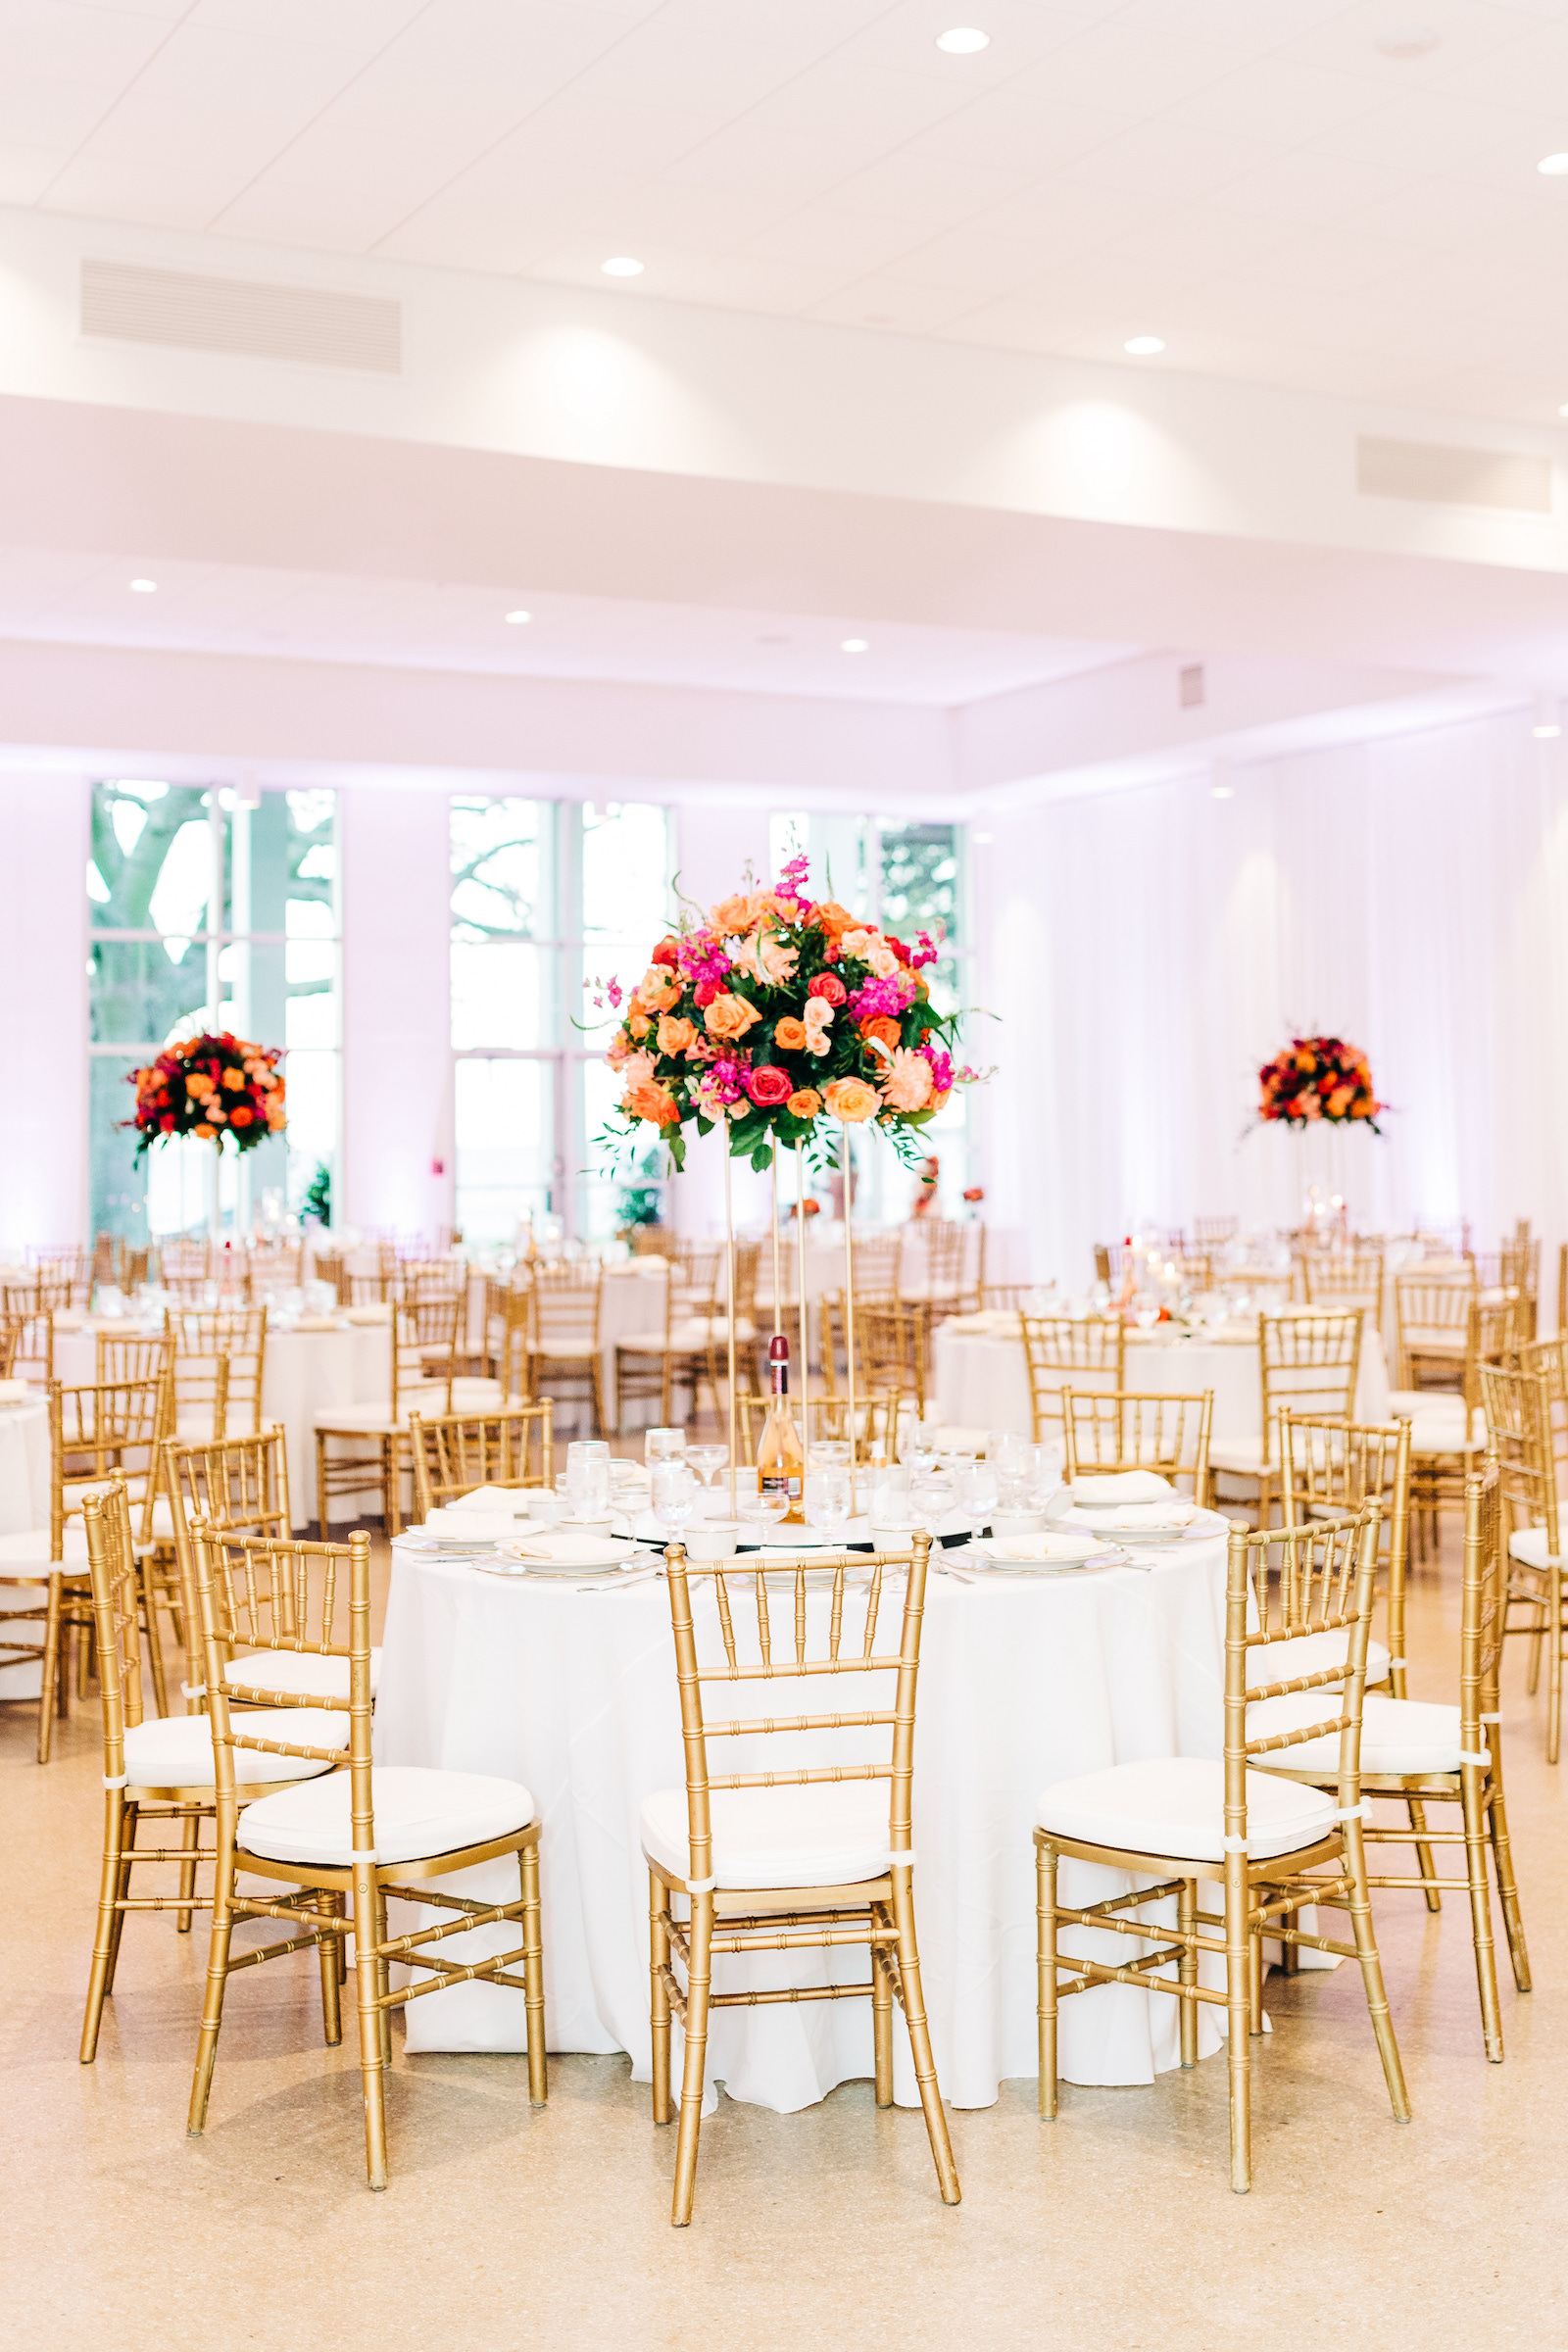 Elegant Wedding Reception Decor, Round Tables with White Table Linens, Gold Chiavari Chairs, Tall Gold Stand with Lush Vibrant Colorful Pink, Orange and Greenery Floral Centerpiece | Wedding Venue Tampa Garden Club | Wedding Rentals Kate Ryan Event Rentals | Wedding Florist Monarch Events and Design